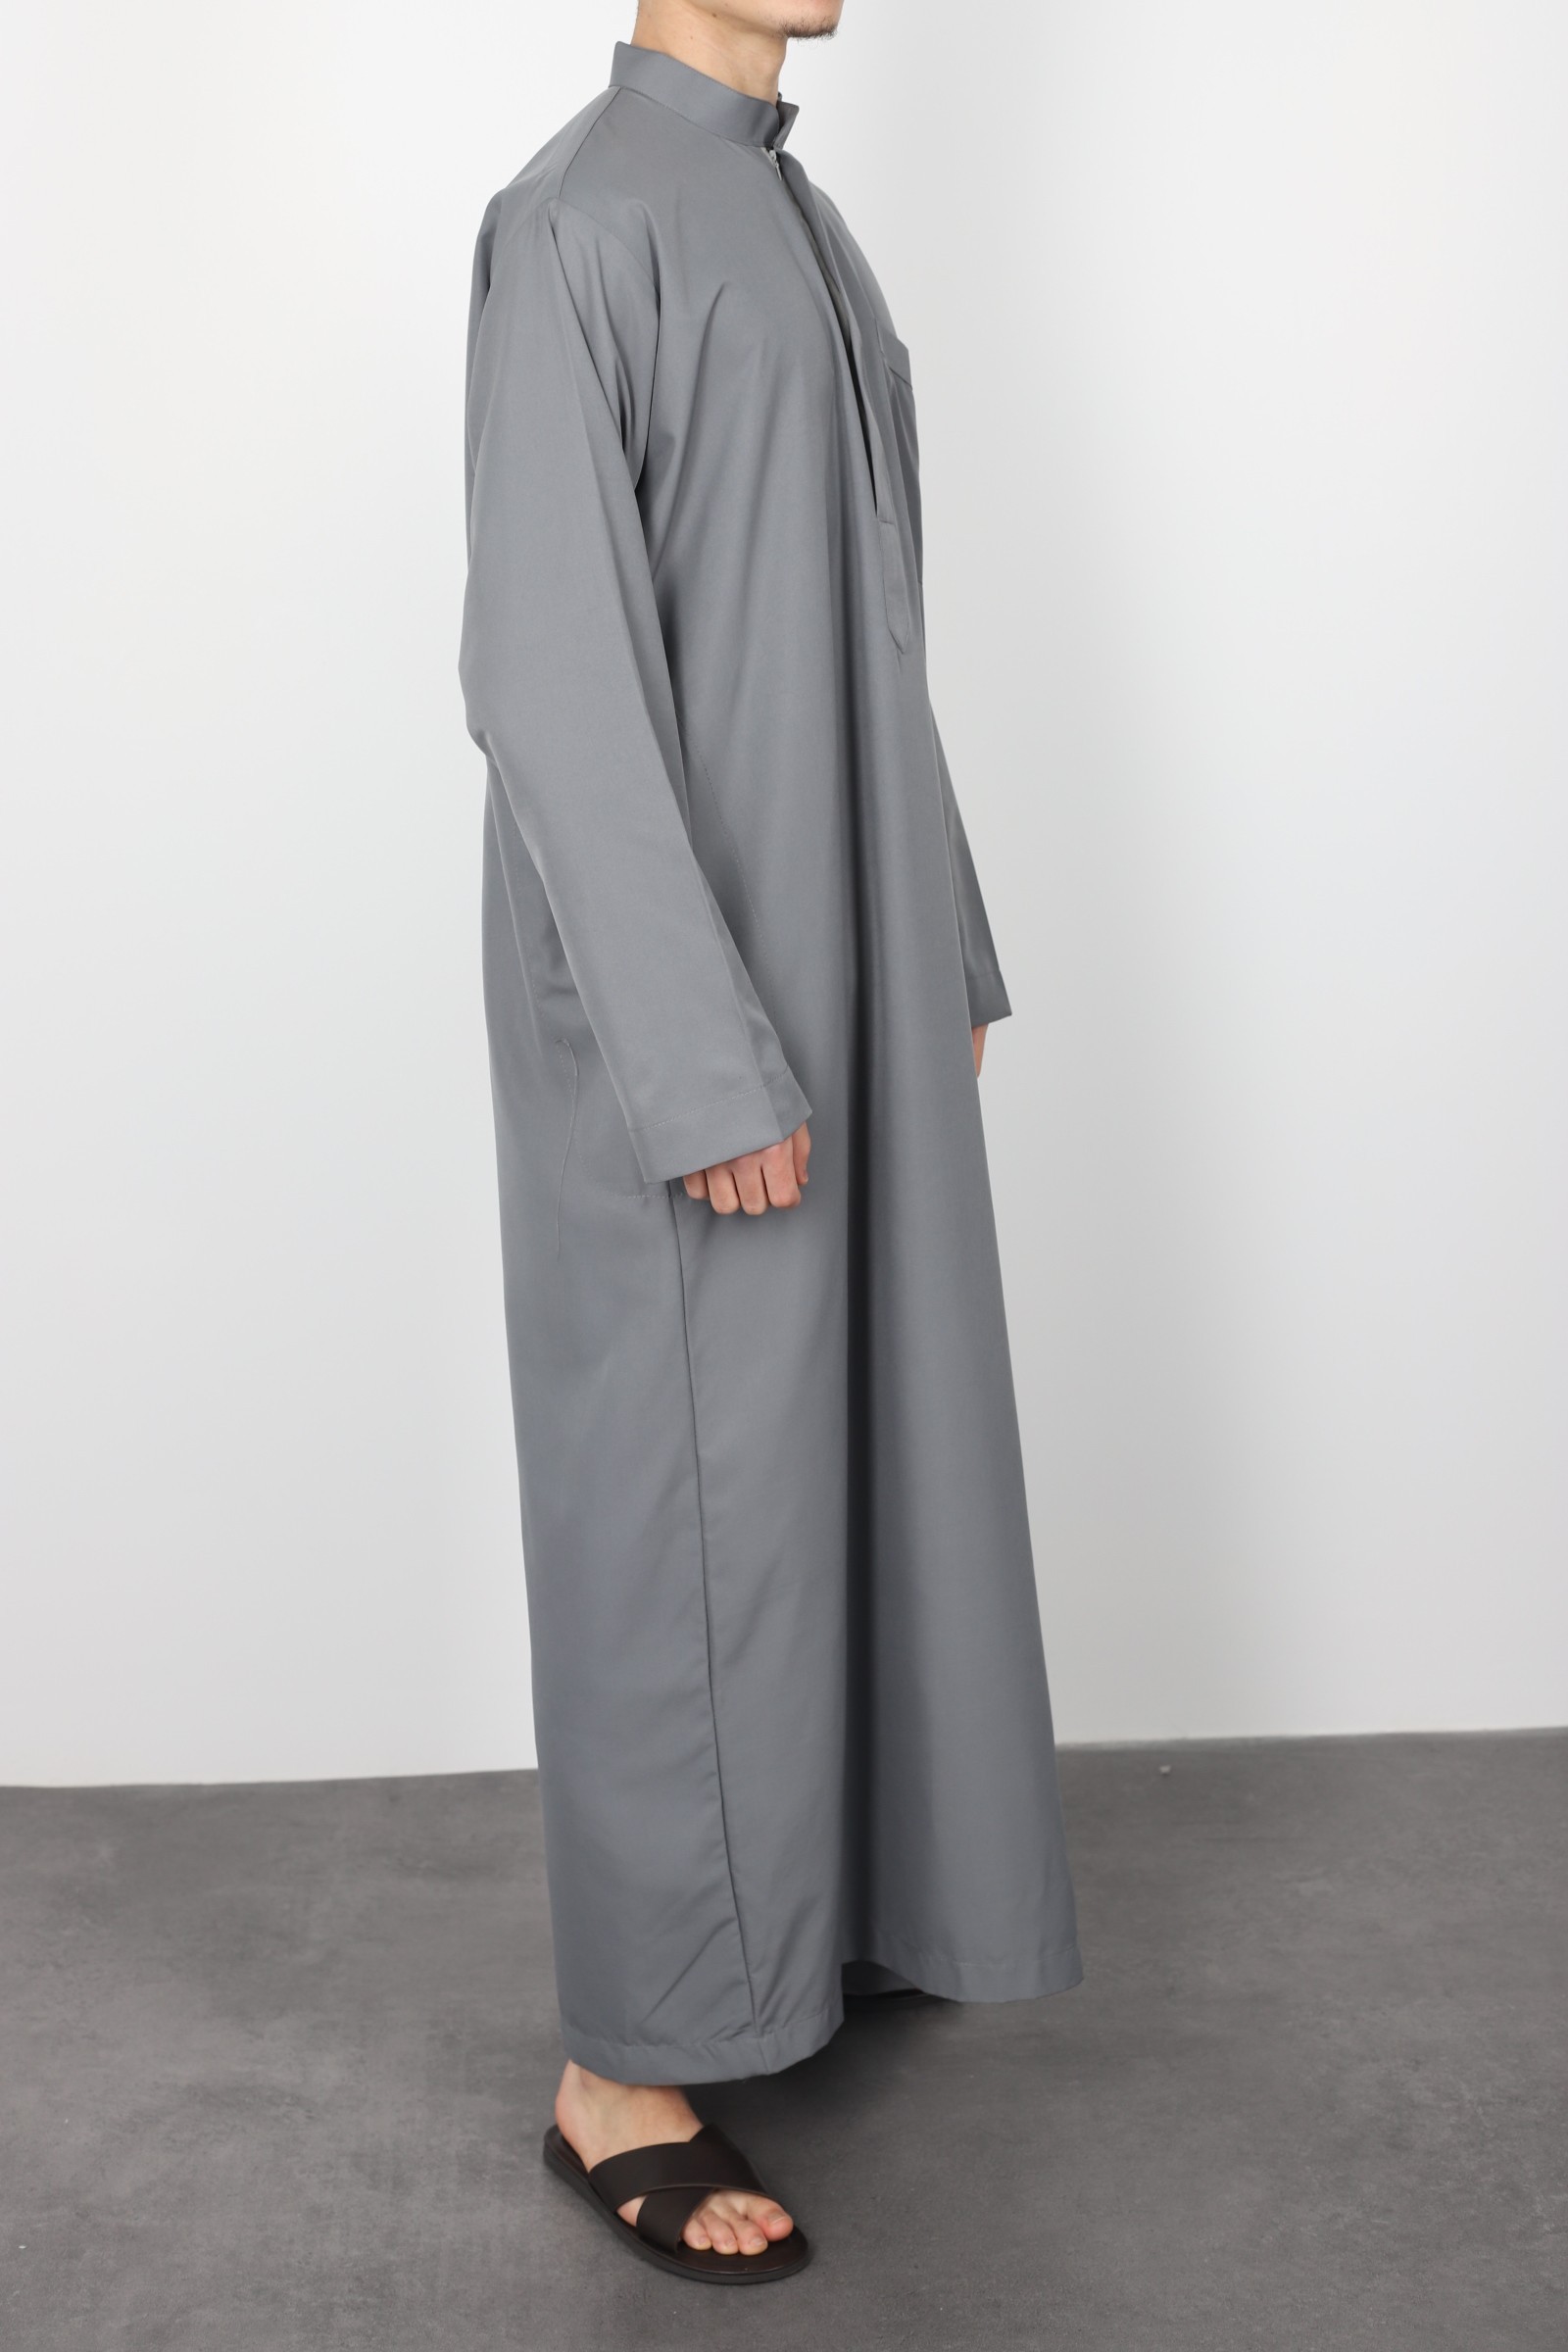 Muslim outfit for men - Emirati Qamis, high quality fabric